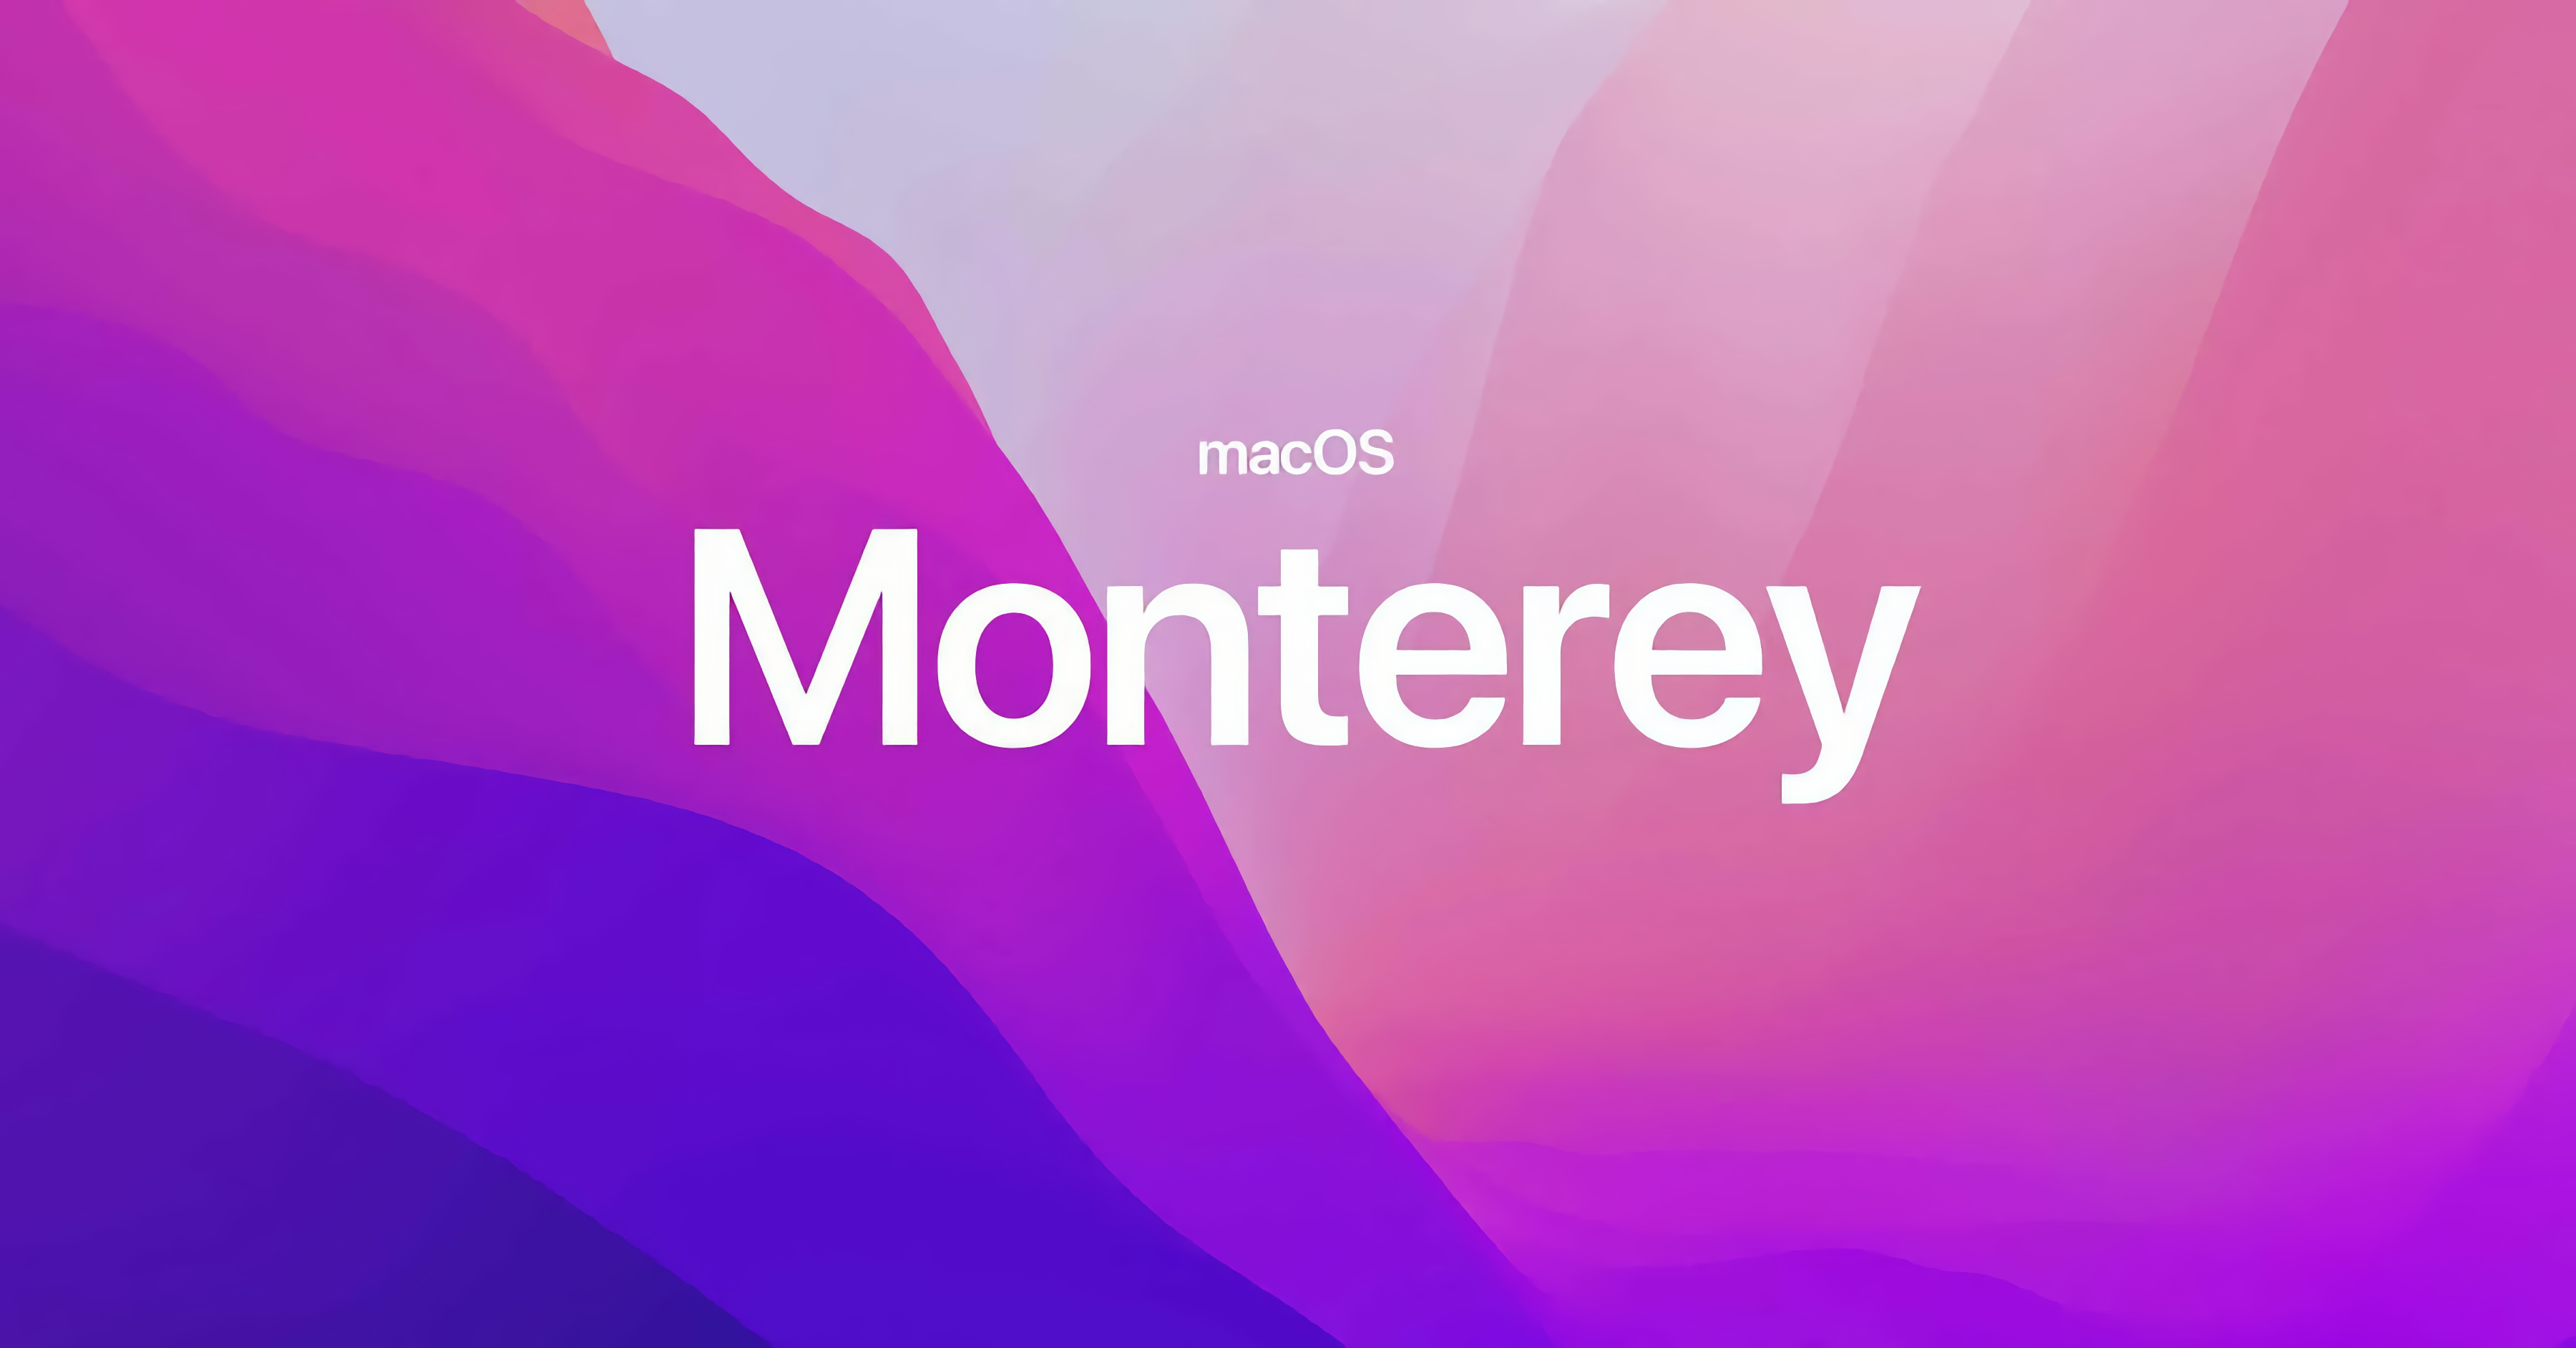 The macOS Monterey stable version release: AirPlay on Mac, updated Safari, Live Text, Spatial Audio support for AirPods Pro, and lots more